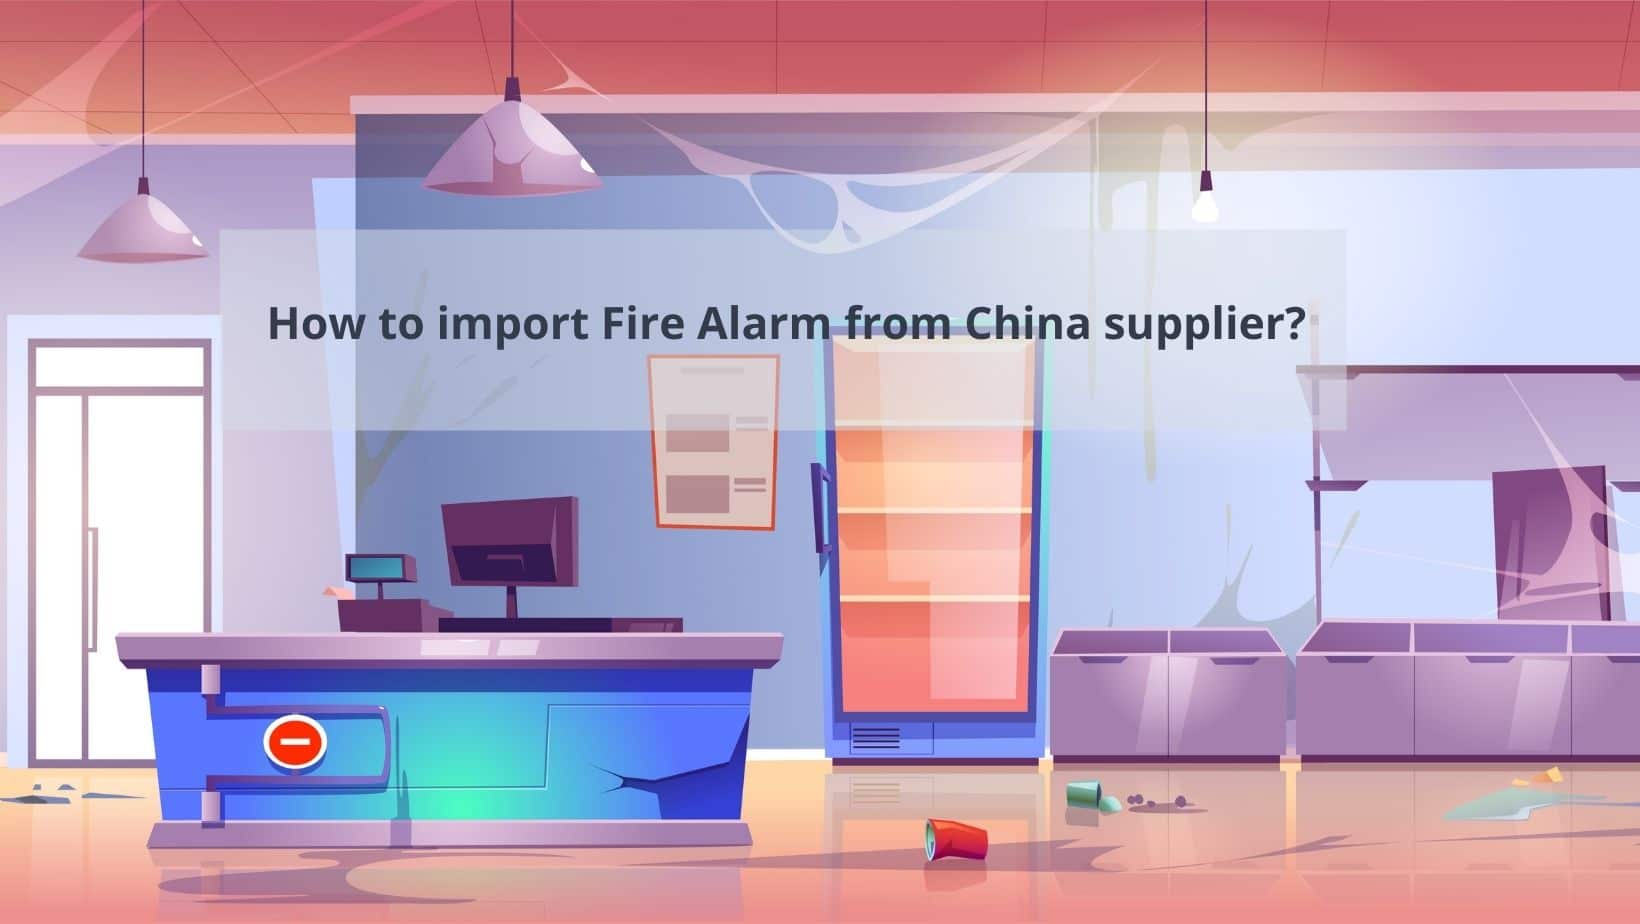 How to import Fire Alarm from China supplier